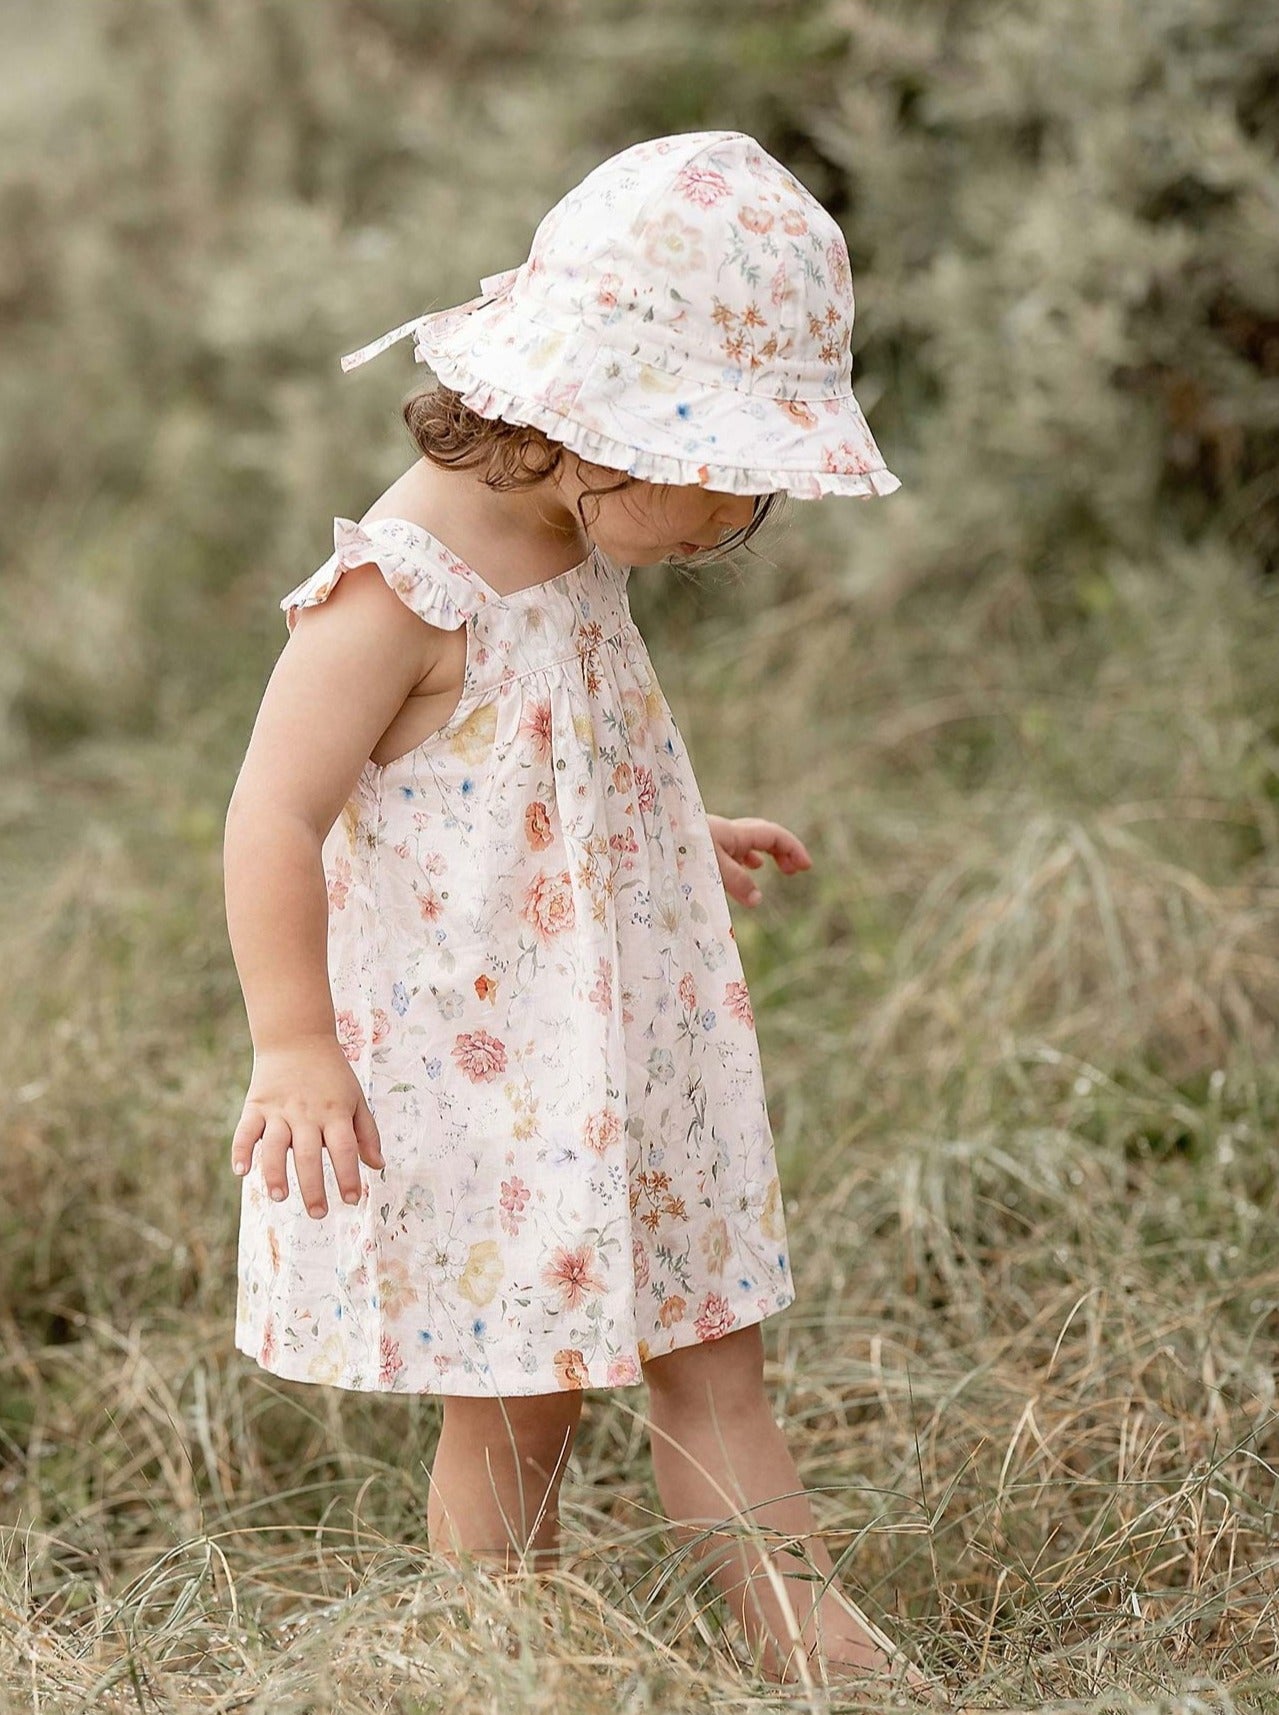 baby girls dress in pink floral print